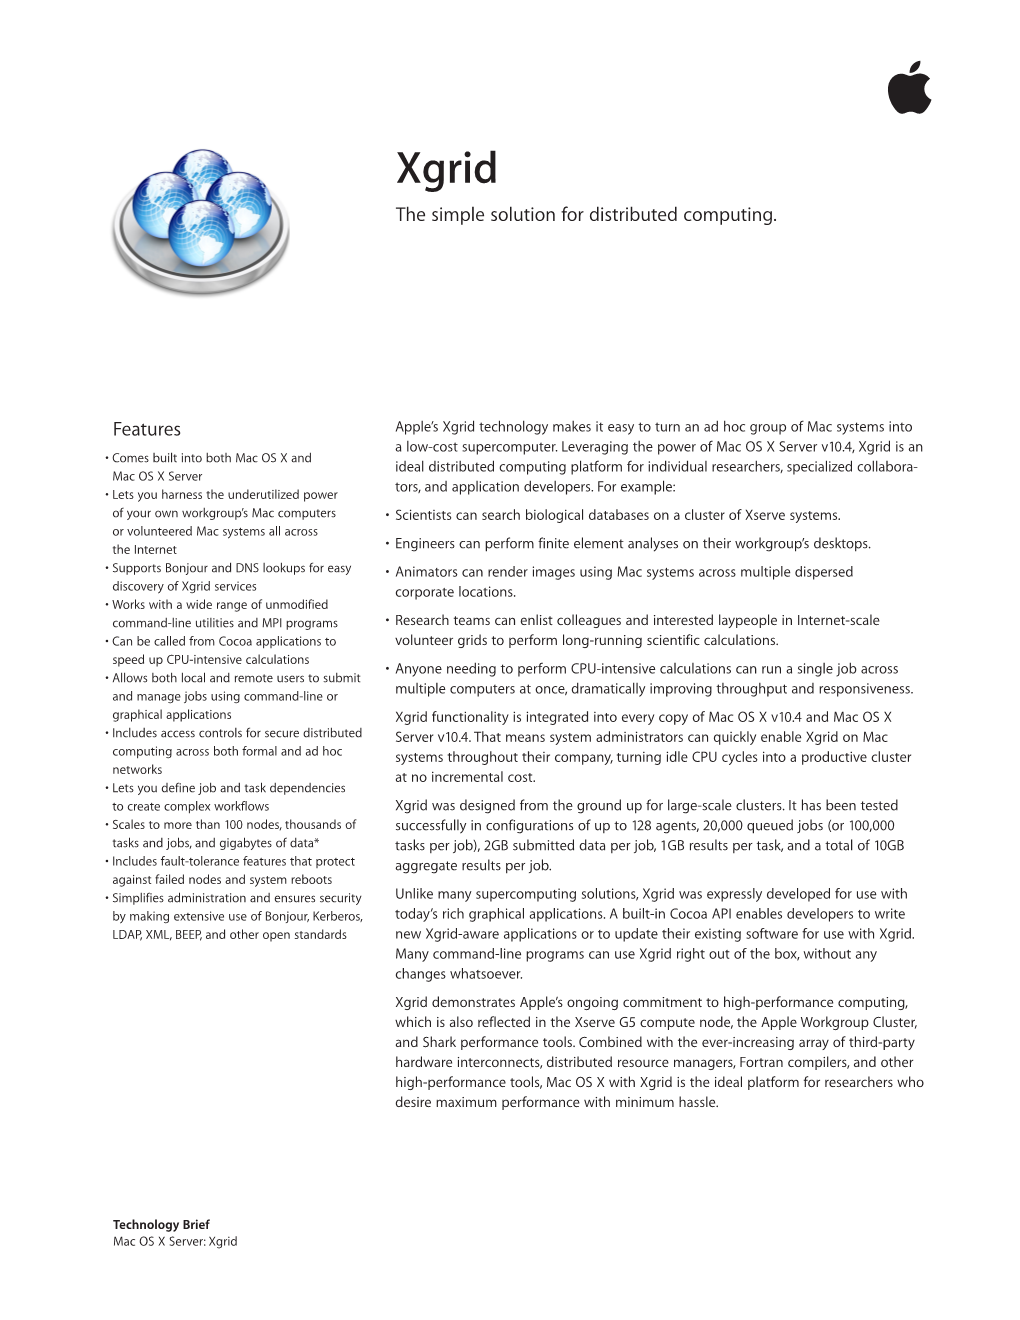 Xgrid the Simple Solution for Distributed Computing